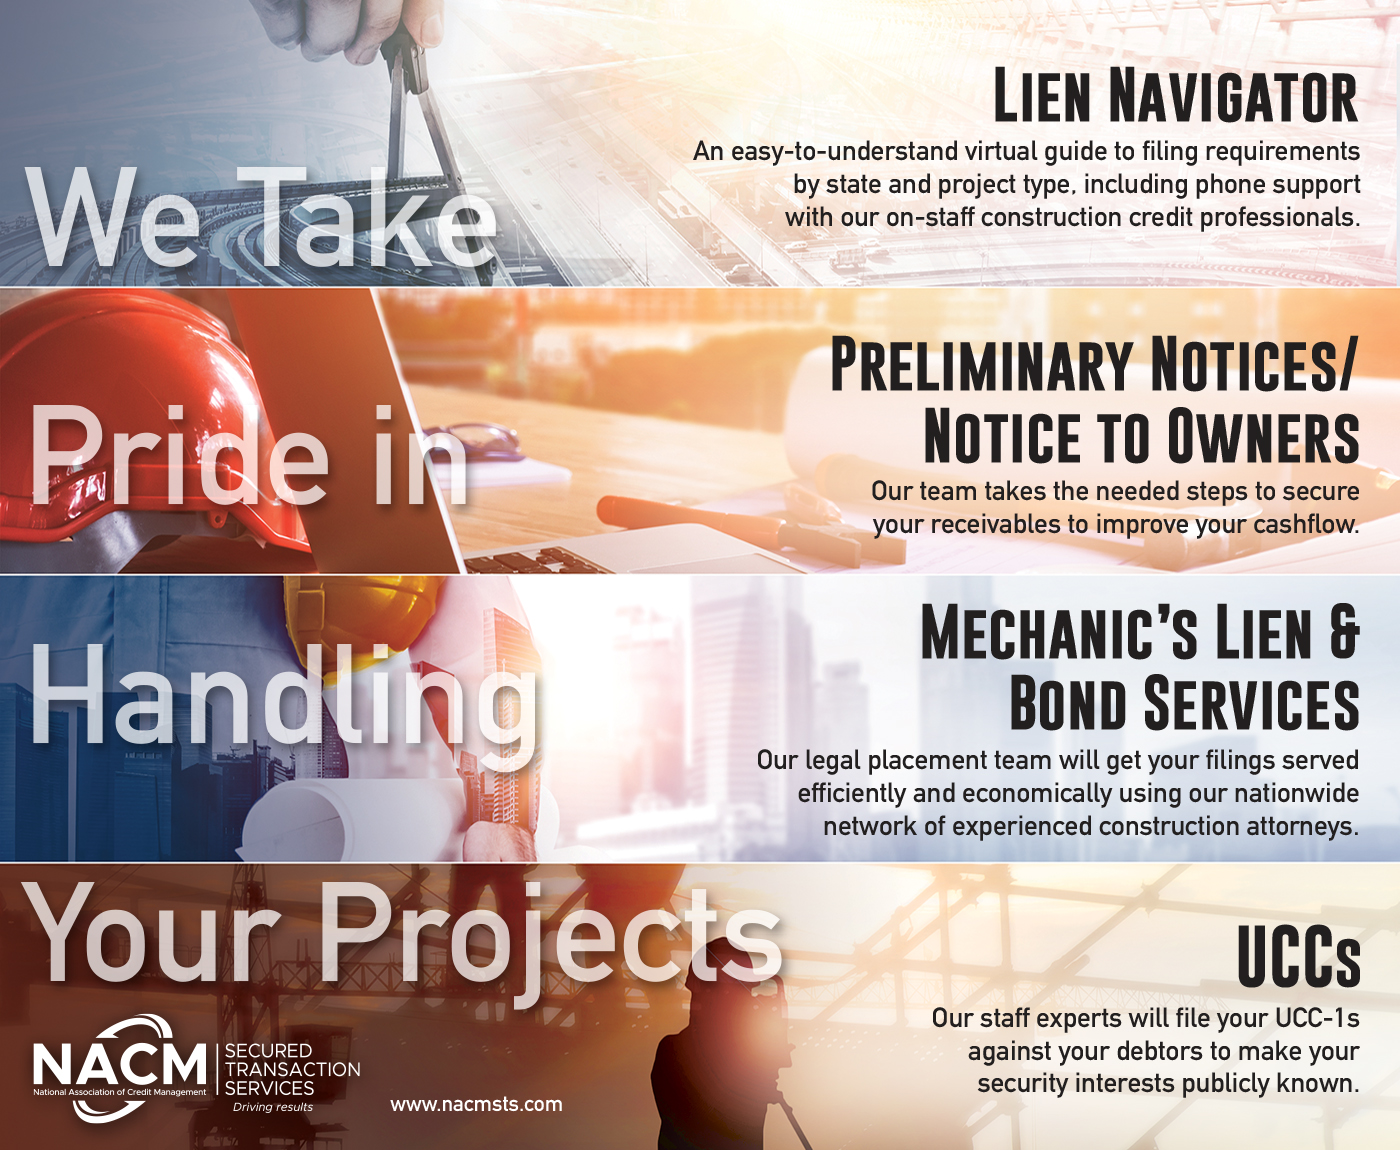 NACM Secured Transaction Services | We take pride in handling your projects.